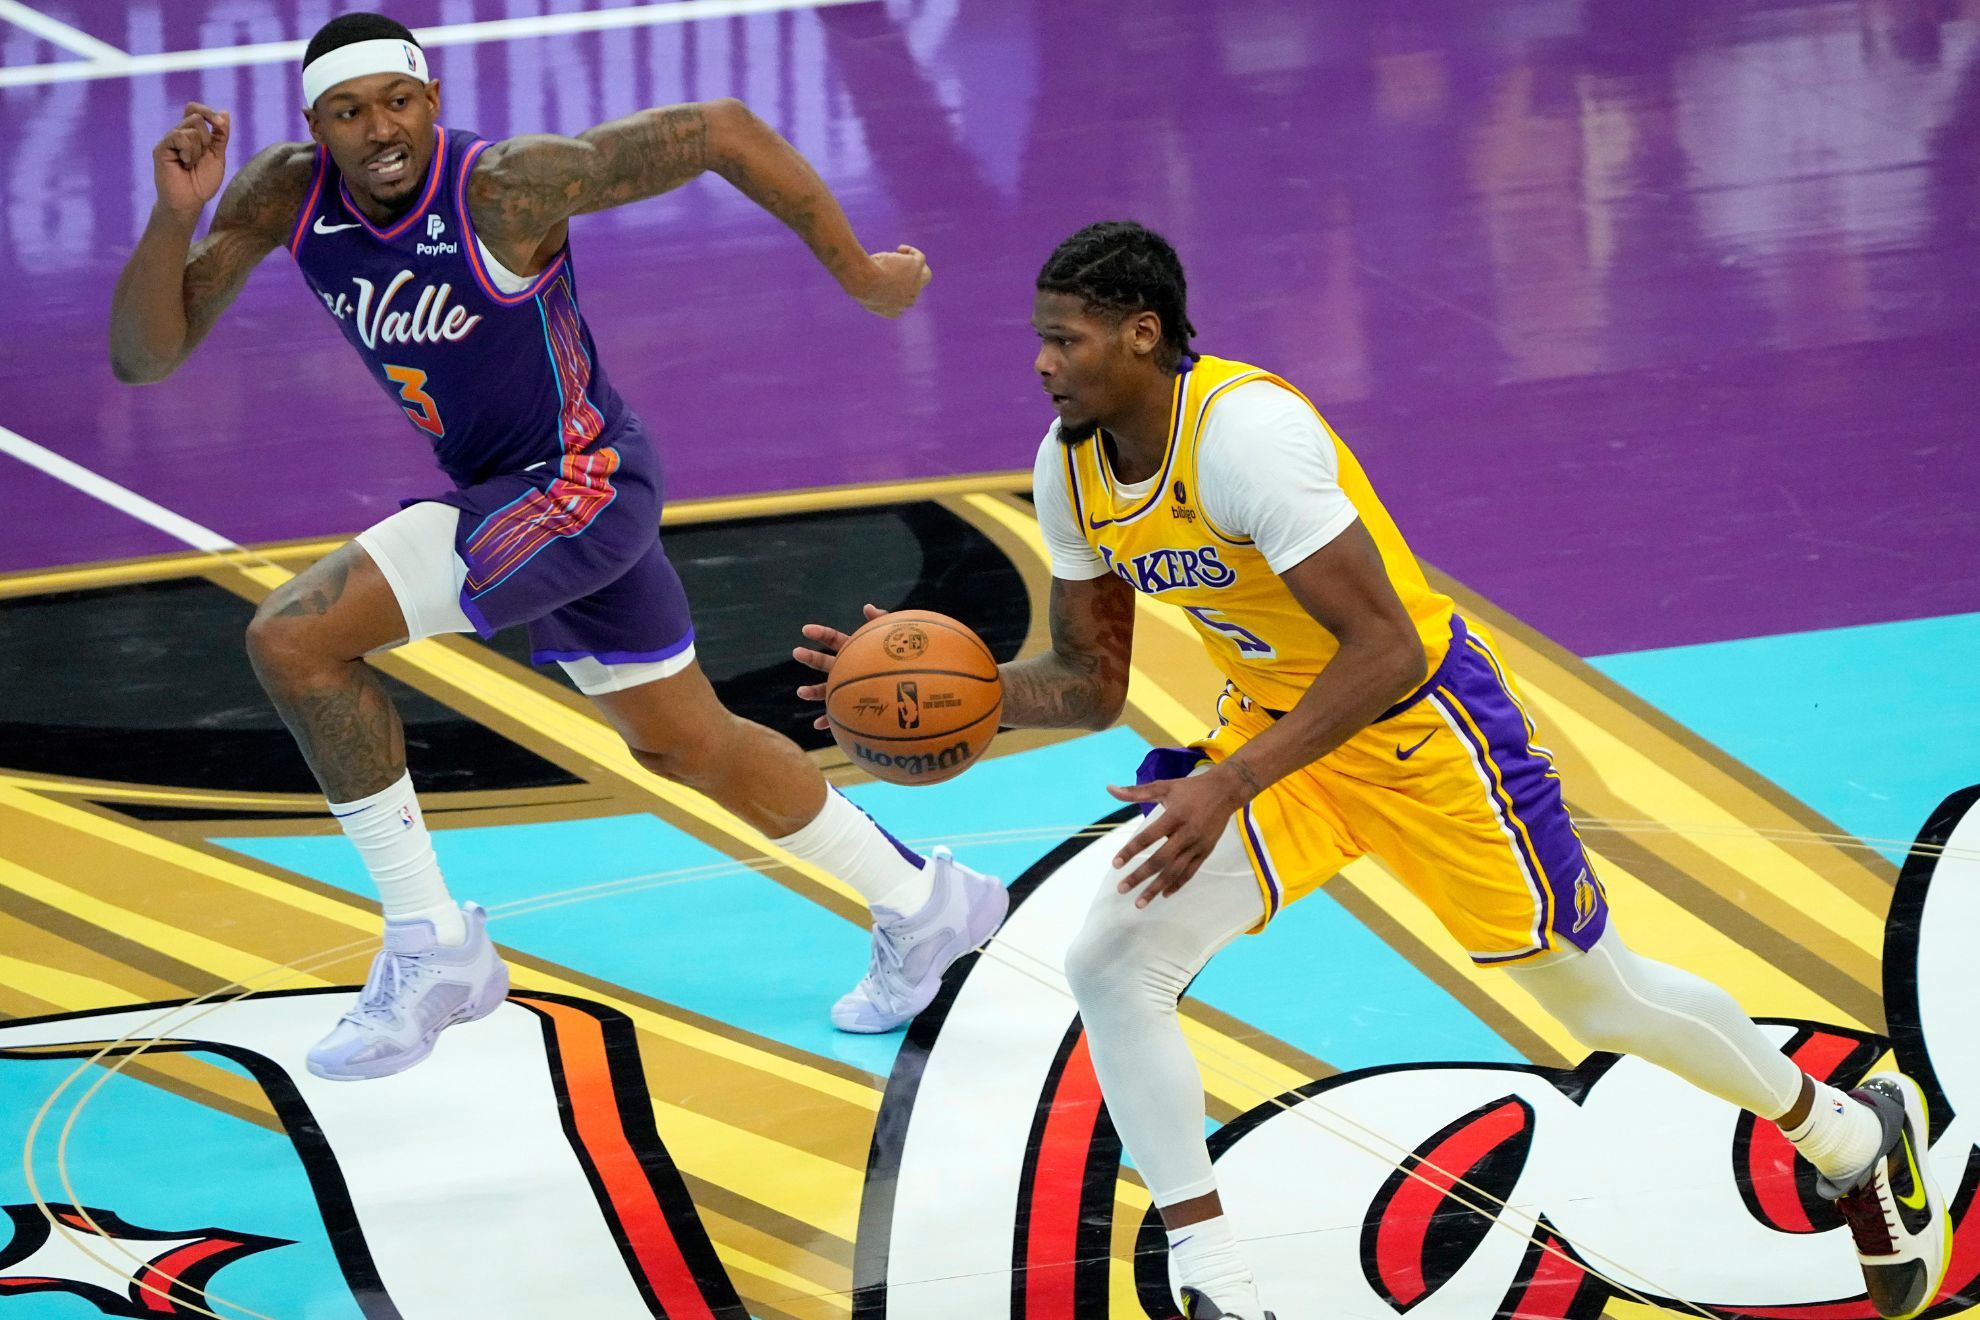 Cam Reddish sinks dagger for Lakers to beat Suns, just like LeBron James predicted